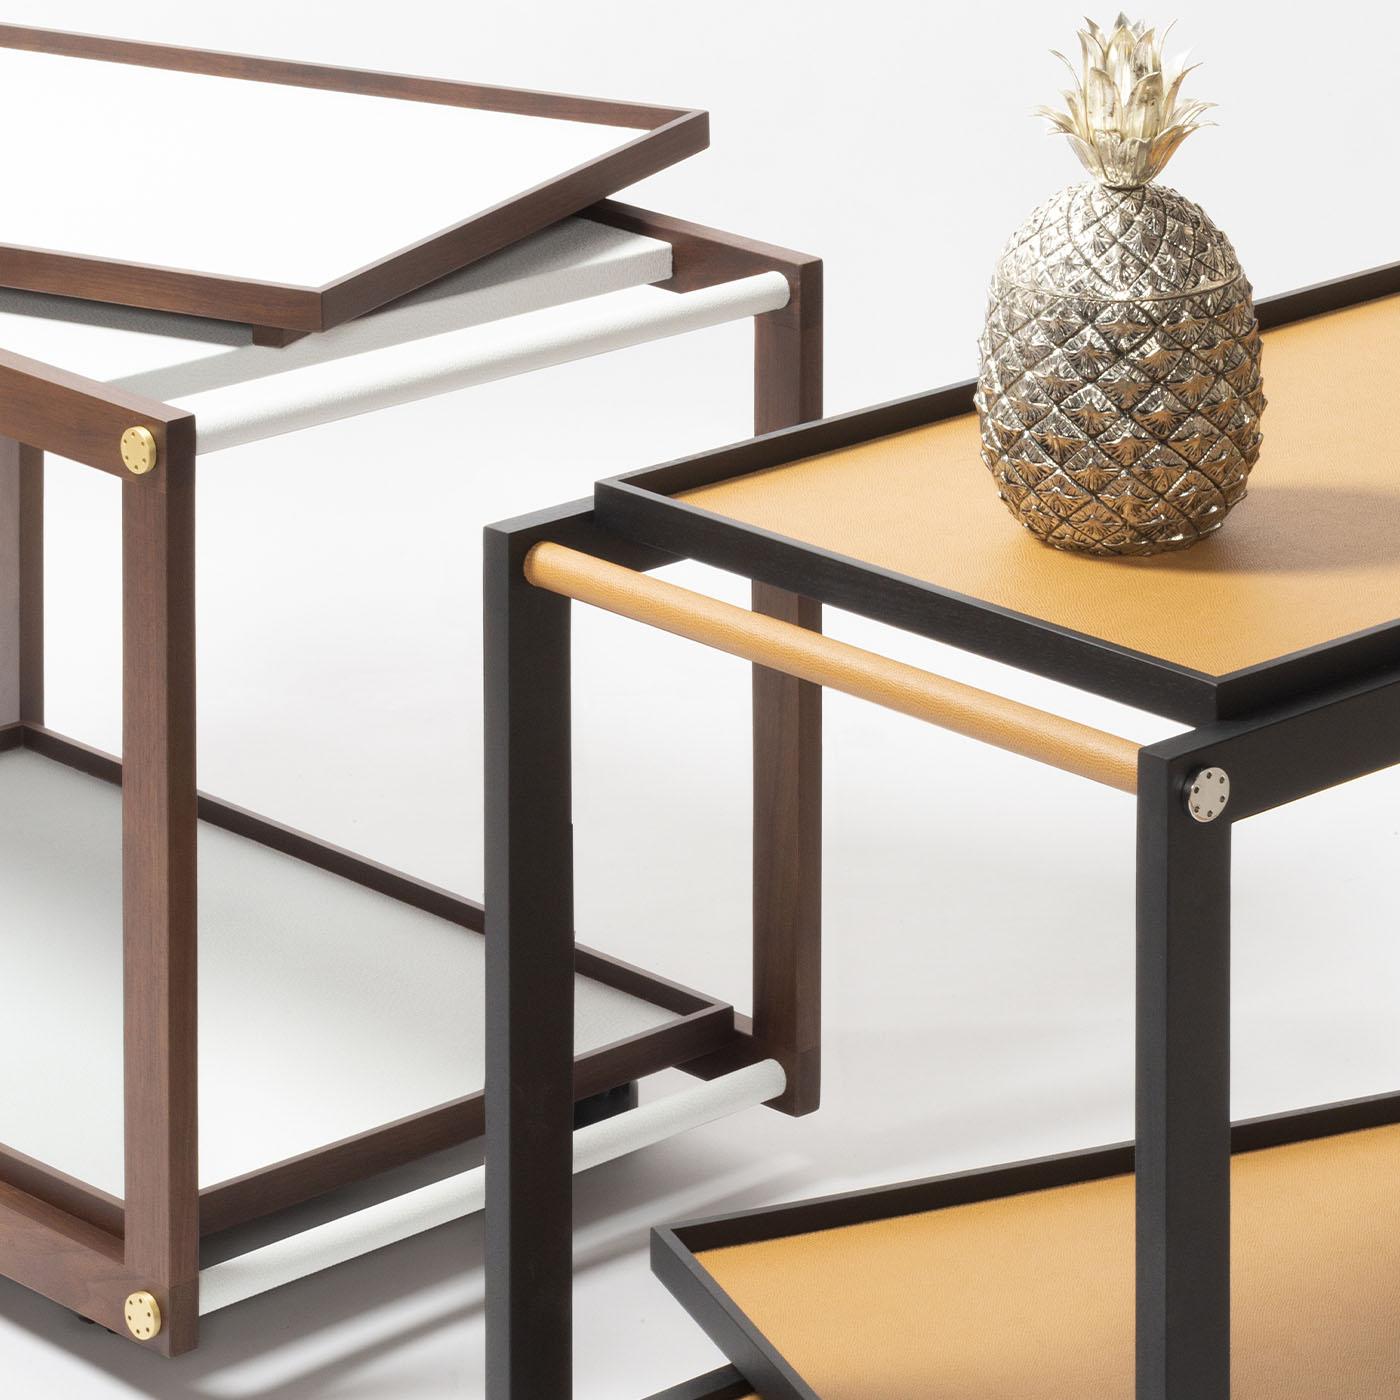 Wood structure is available in different finishes featuring fine leather and metal inserts. Provided with two removable trays and omnidirectional wheels. Different walnut wood finishes and metal are available upon request.